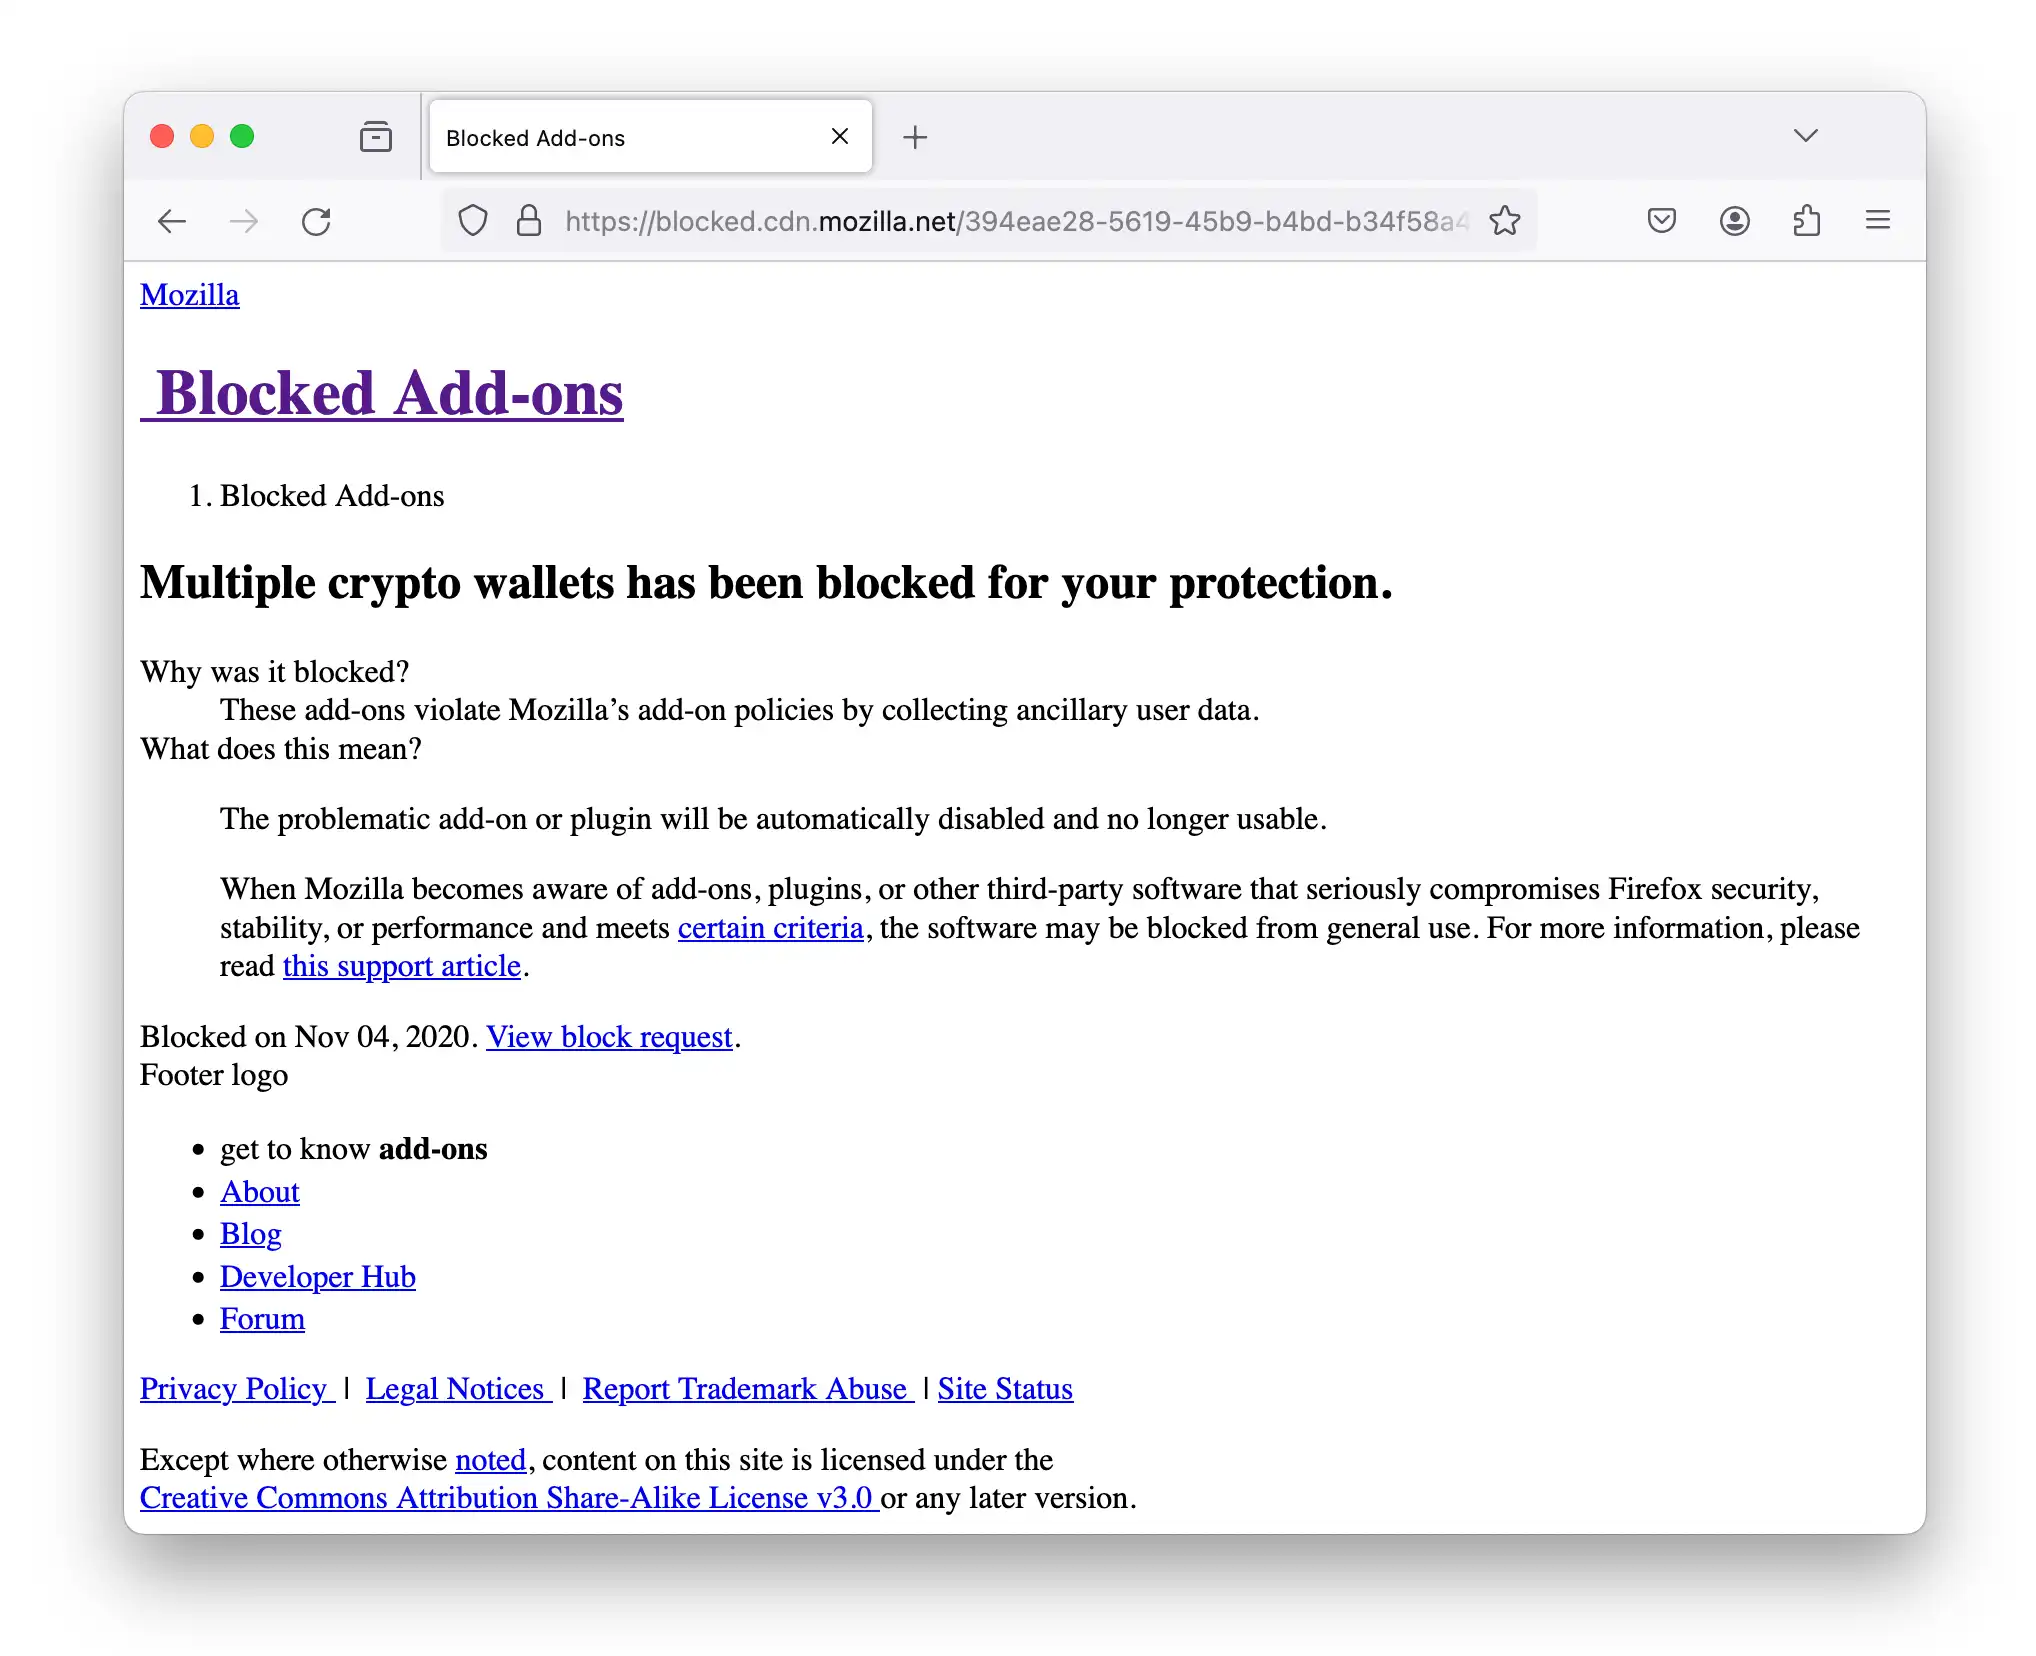 An example of a blocked Firefox add-on